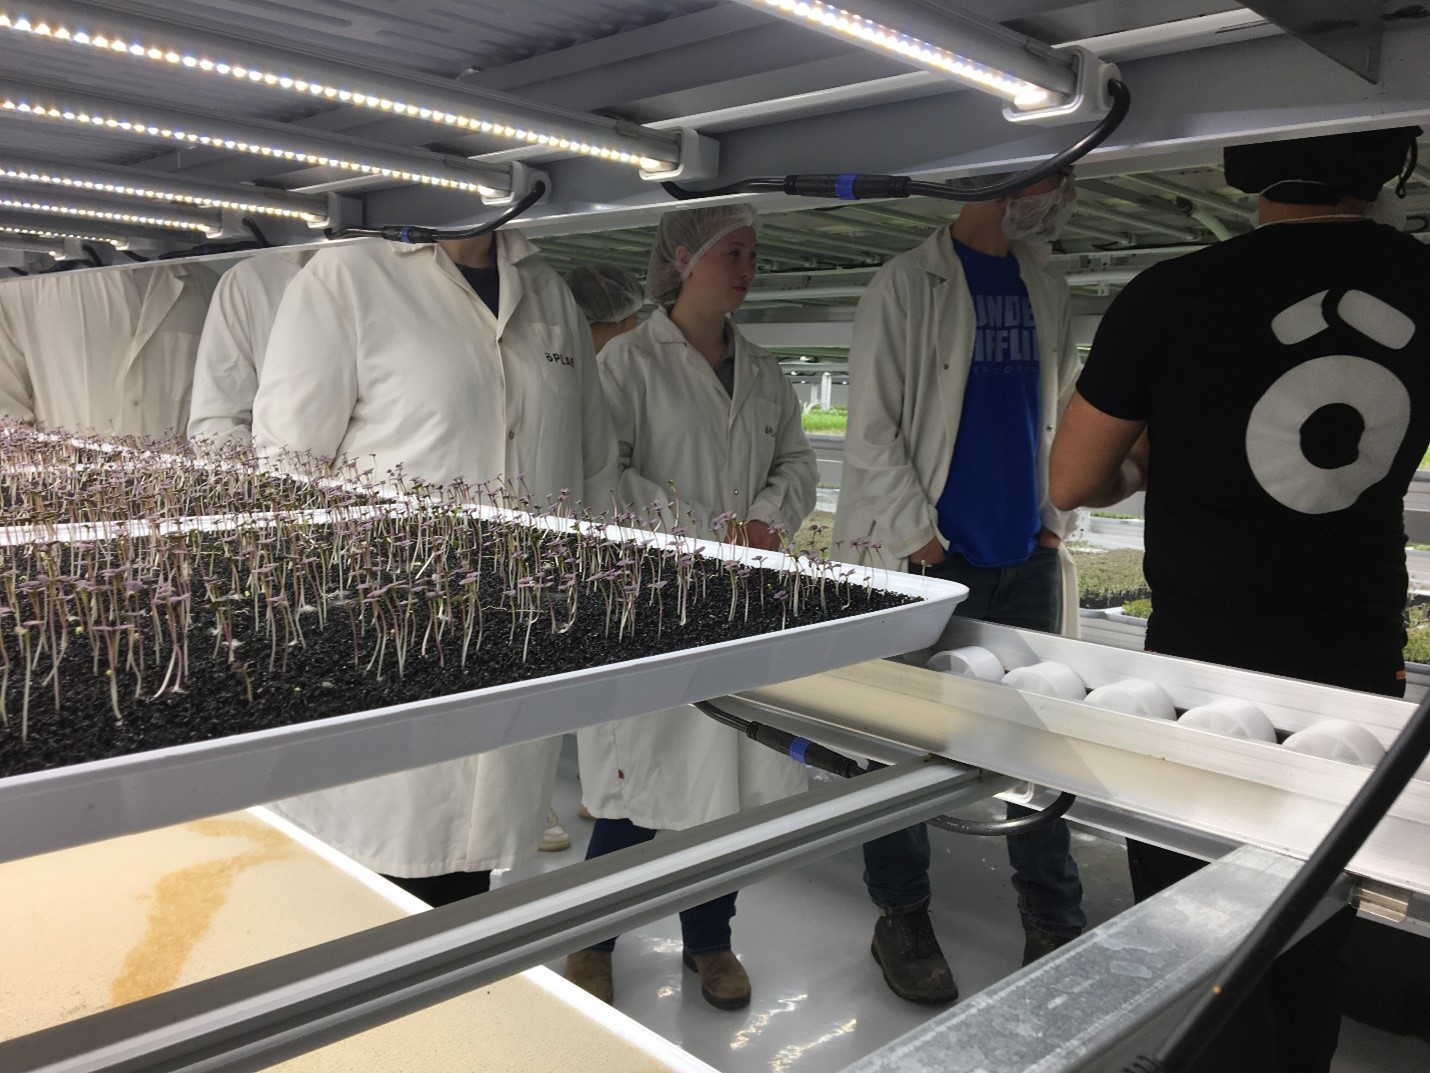 Students stand near trays of growing microgreens at a commercial facility